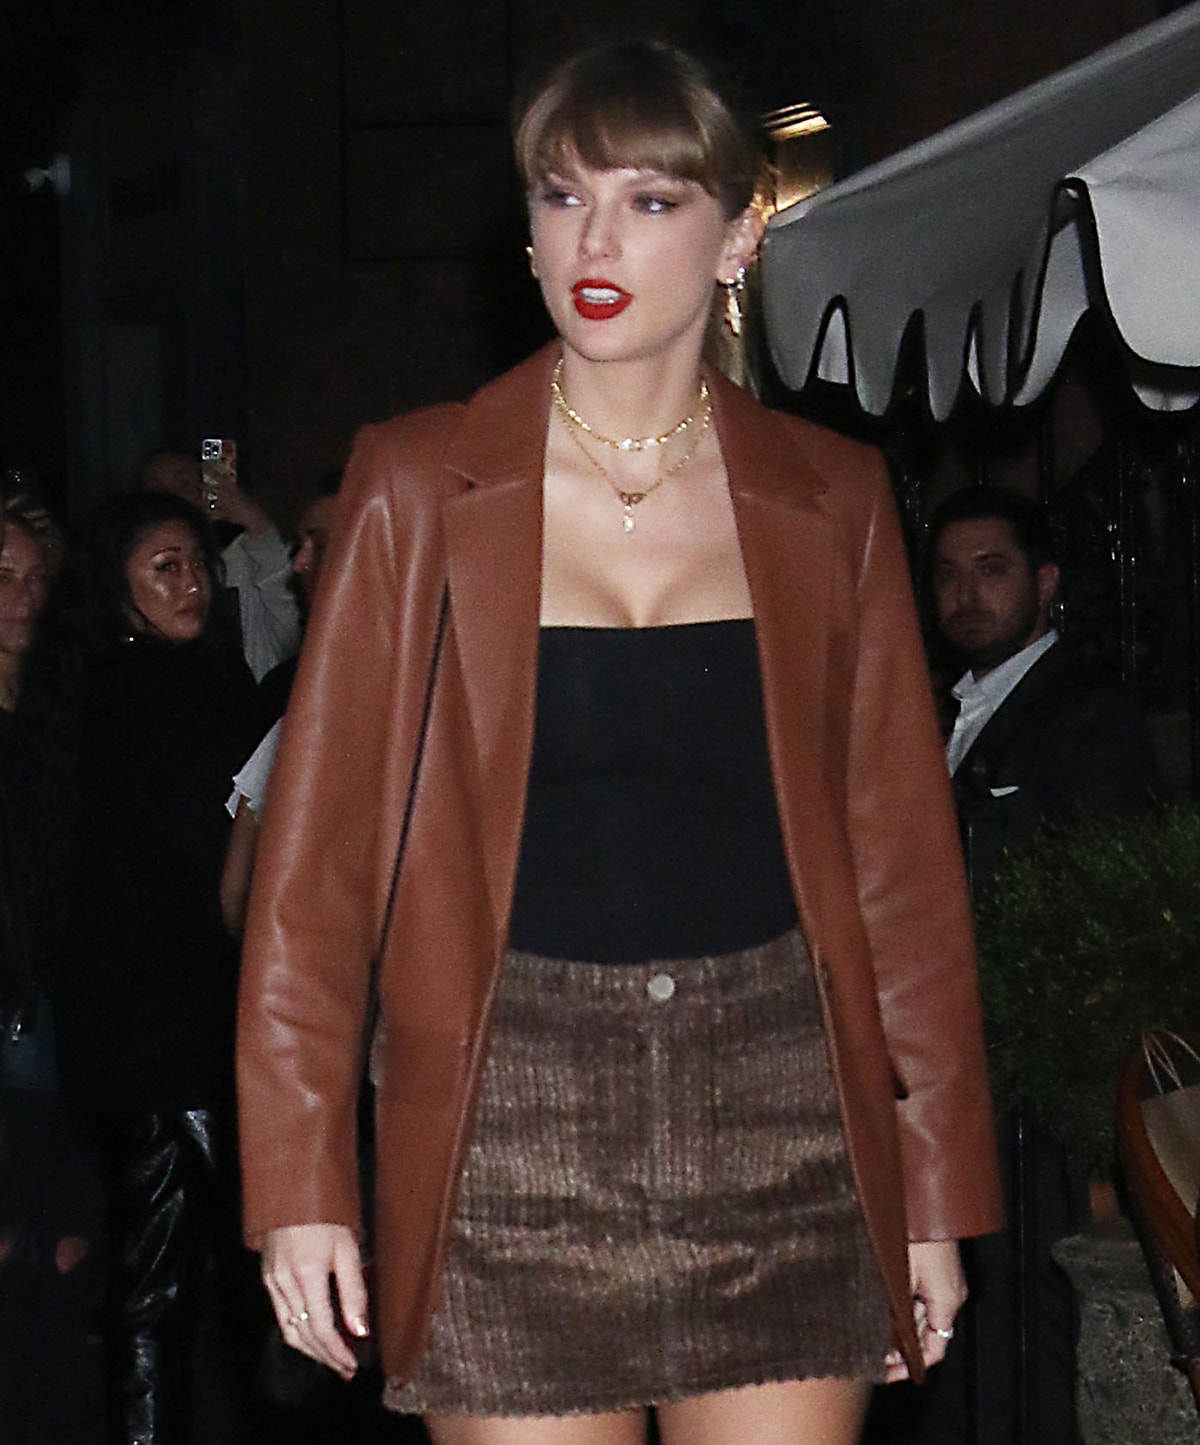 Taylor Swift completes her stylish fall look with gold jewelry, low ponytail, and vibrant red lipstick